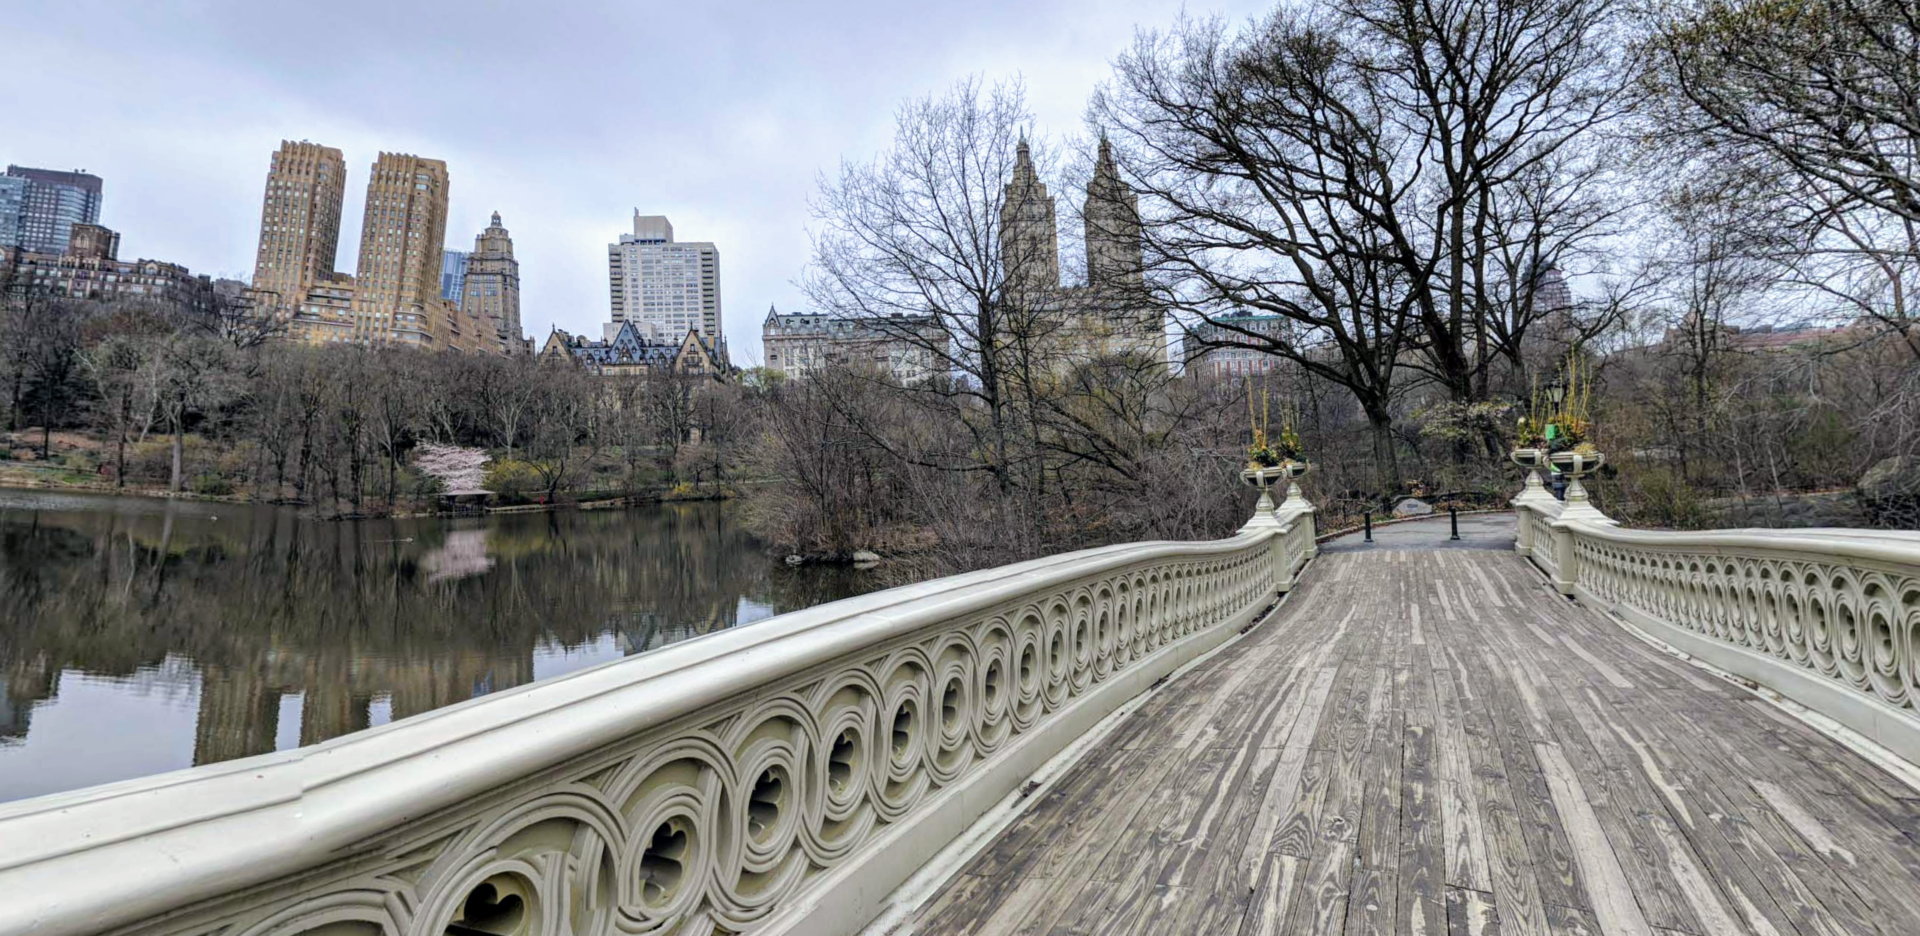 a bridge over Central Park Lake with buildings seen beyond naked trees